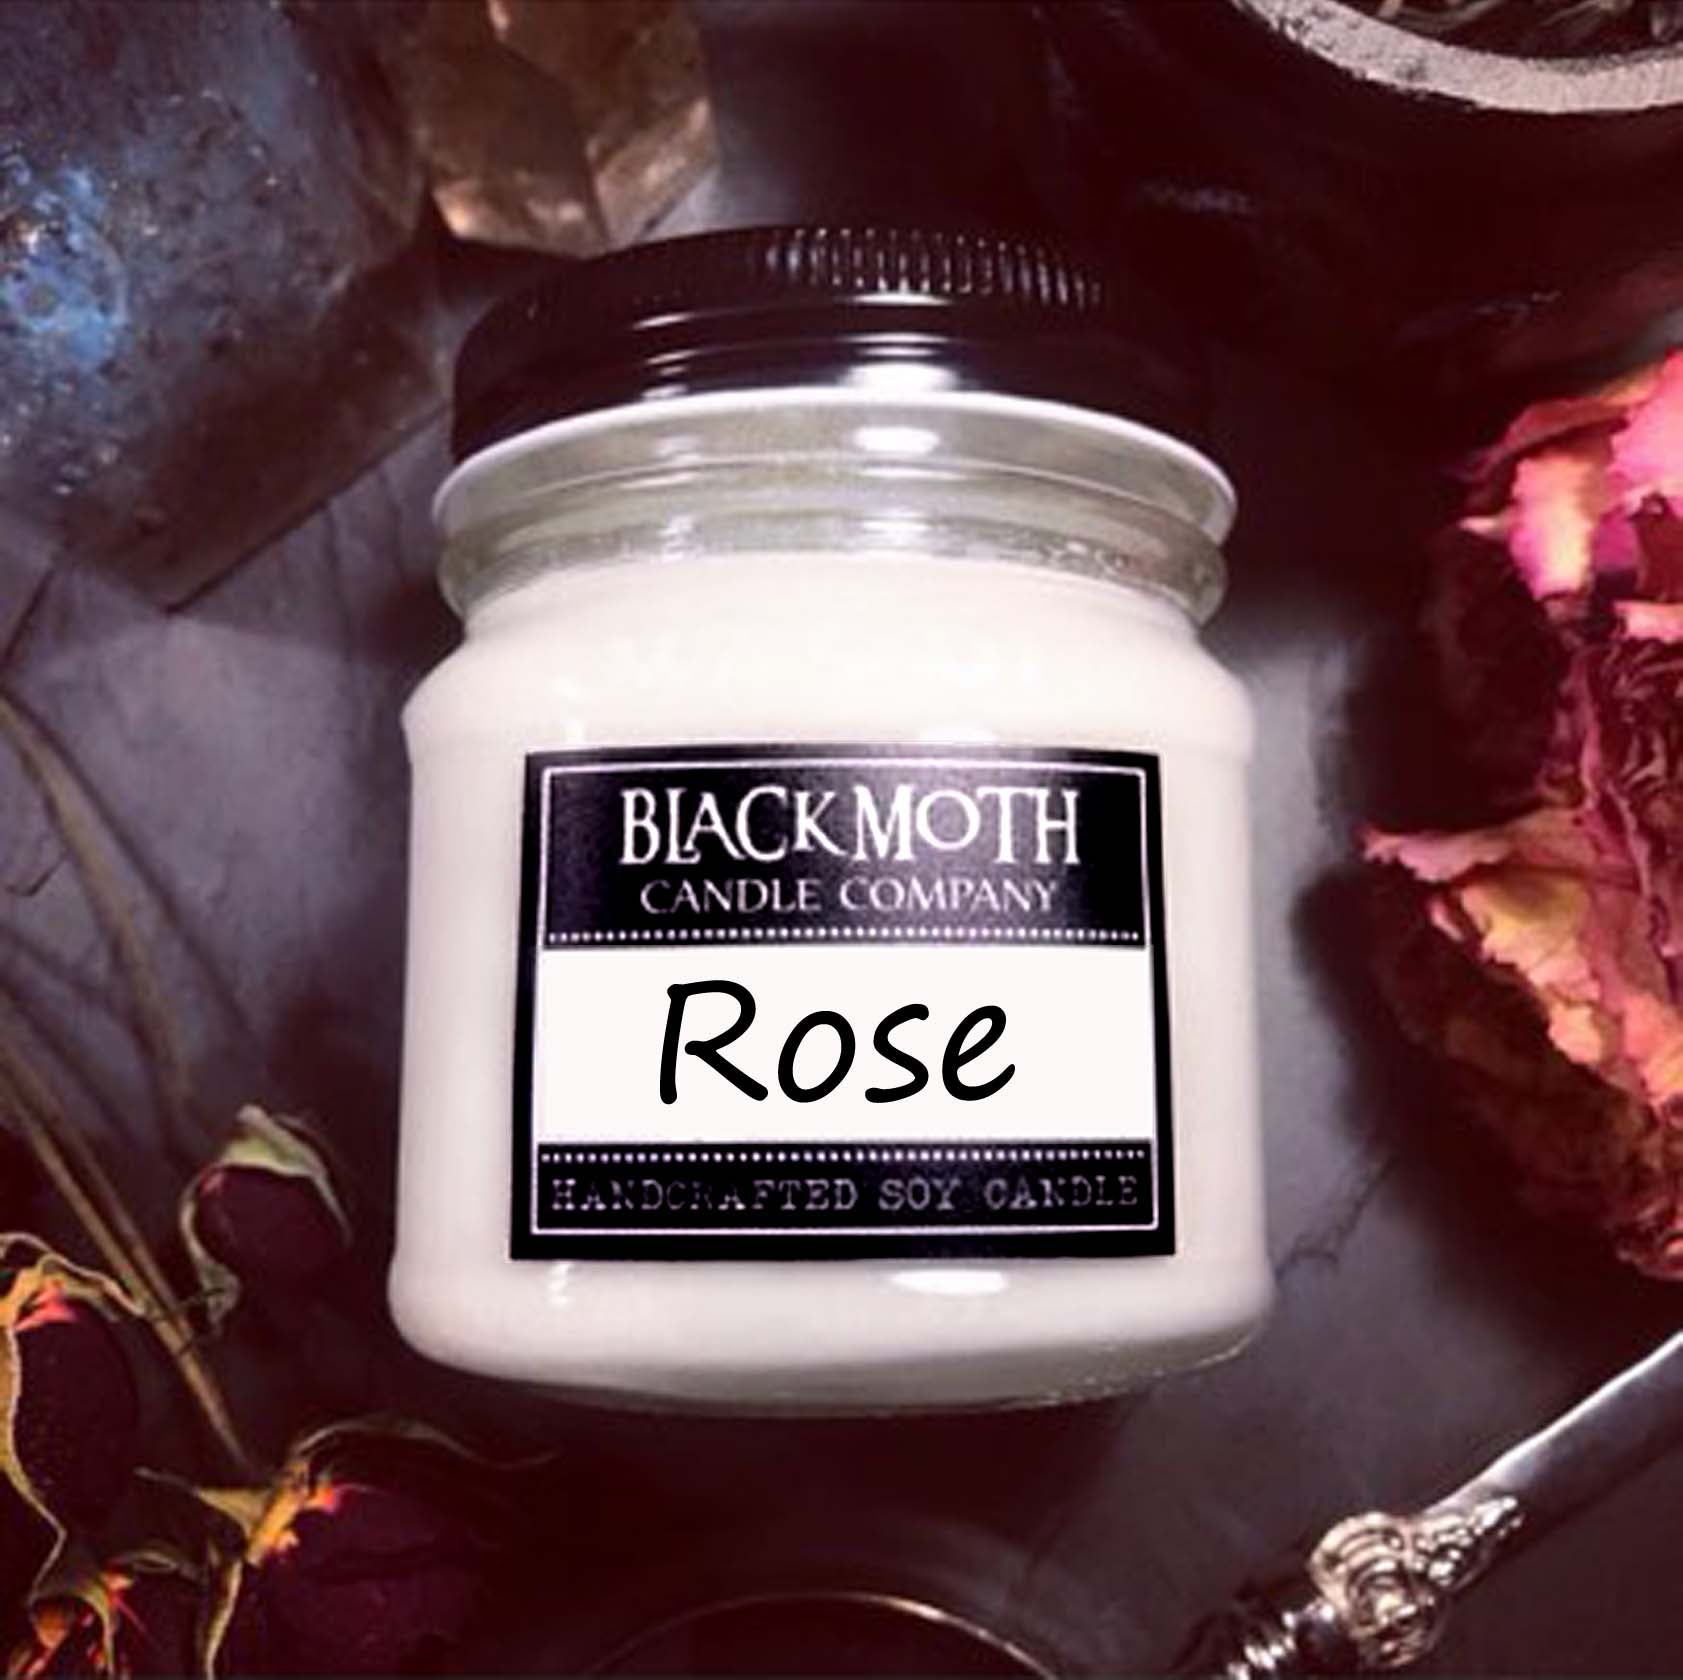 8 oz Rose Scented Soy Candle in Mason Jar